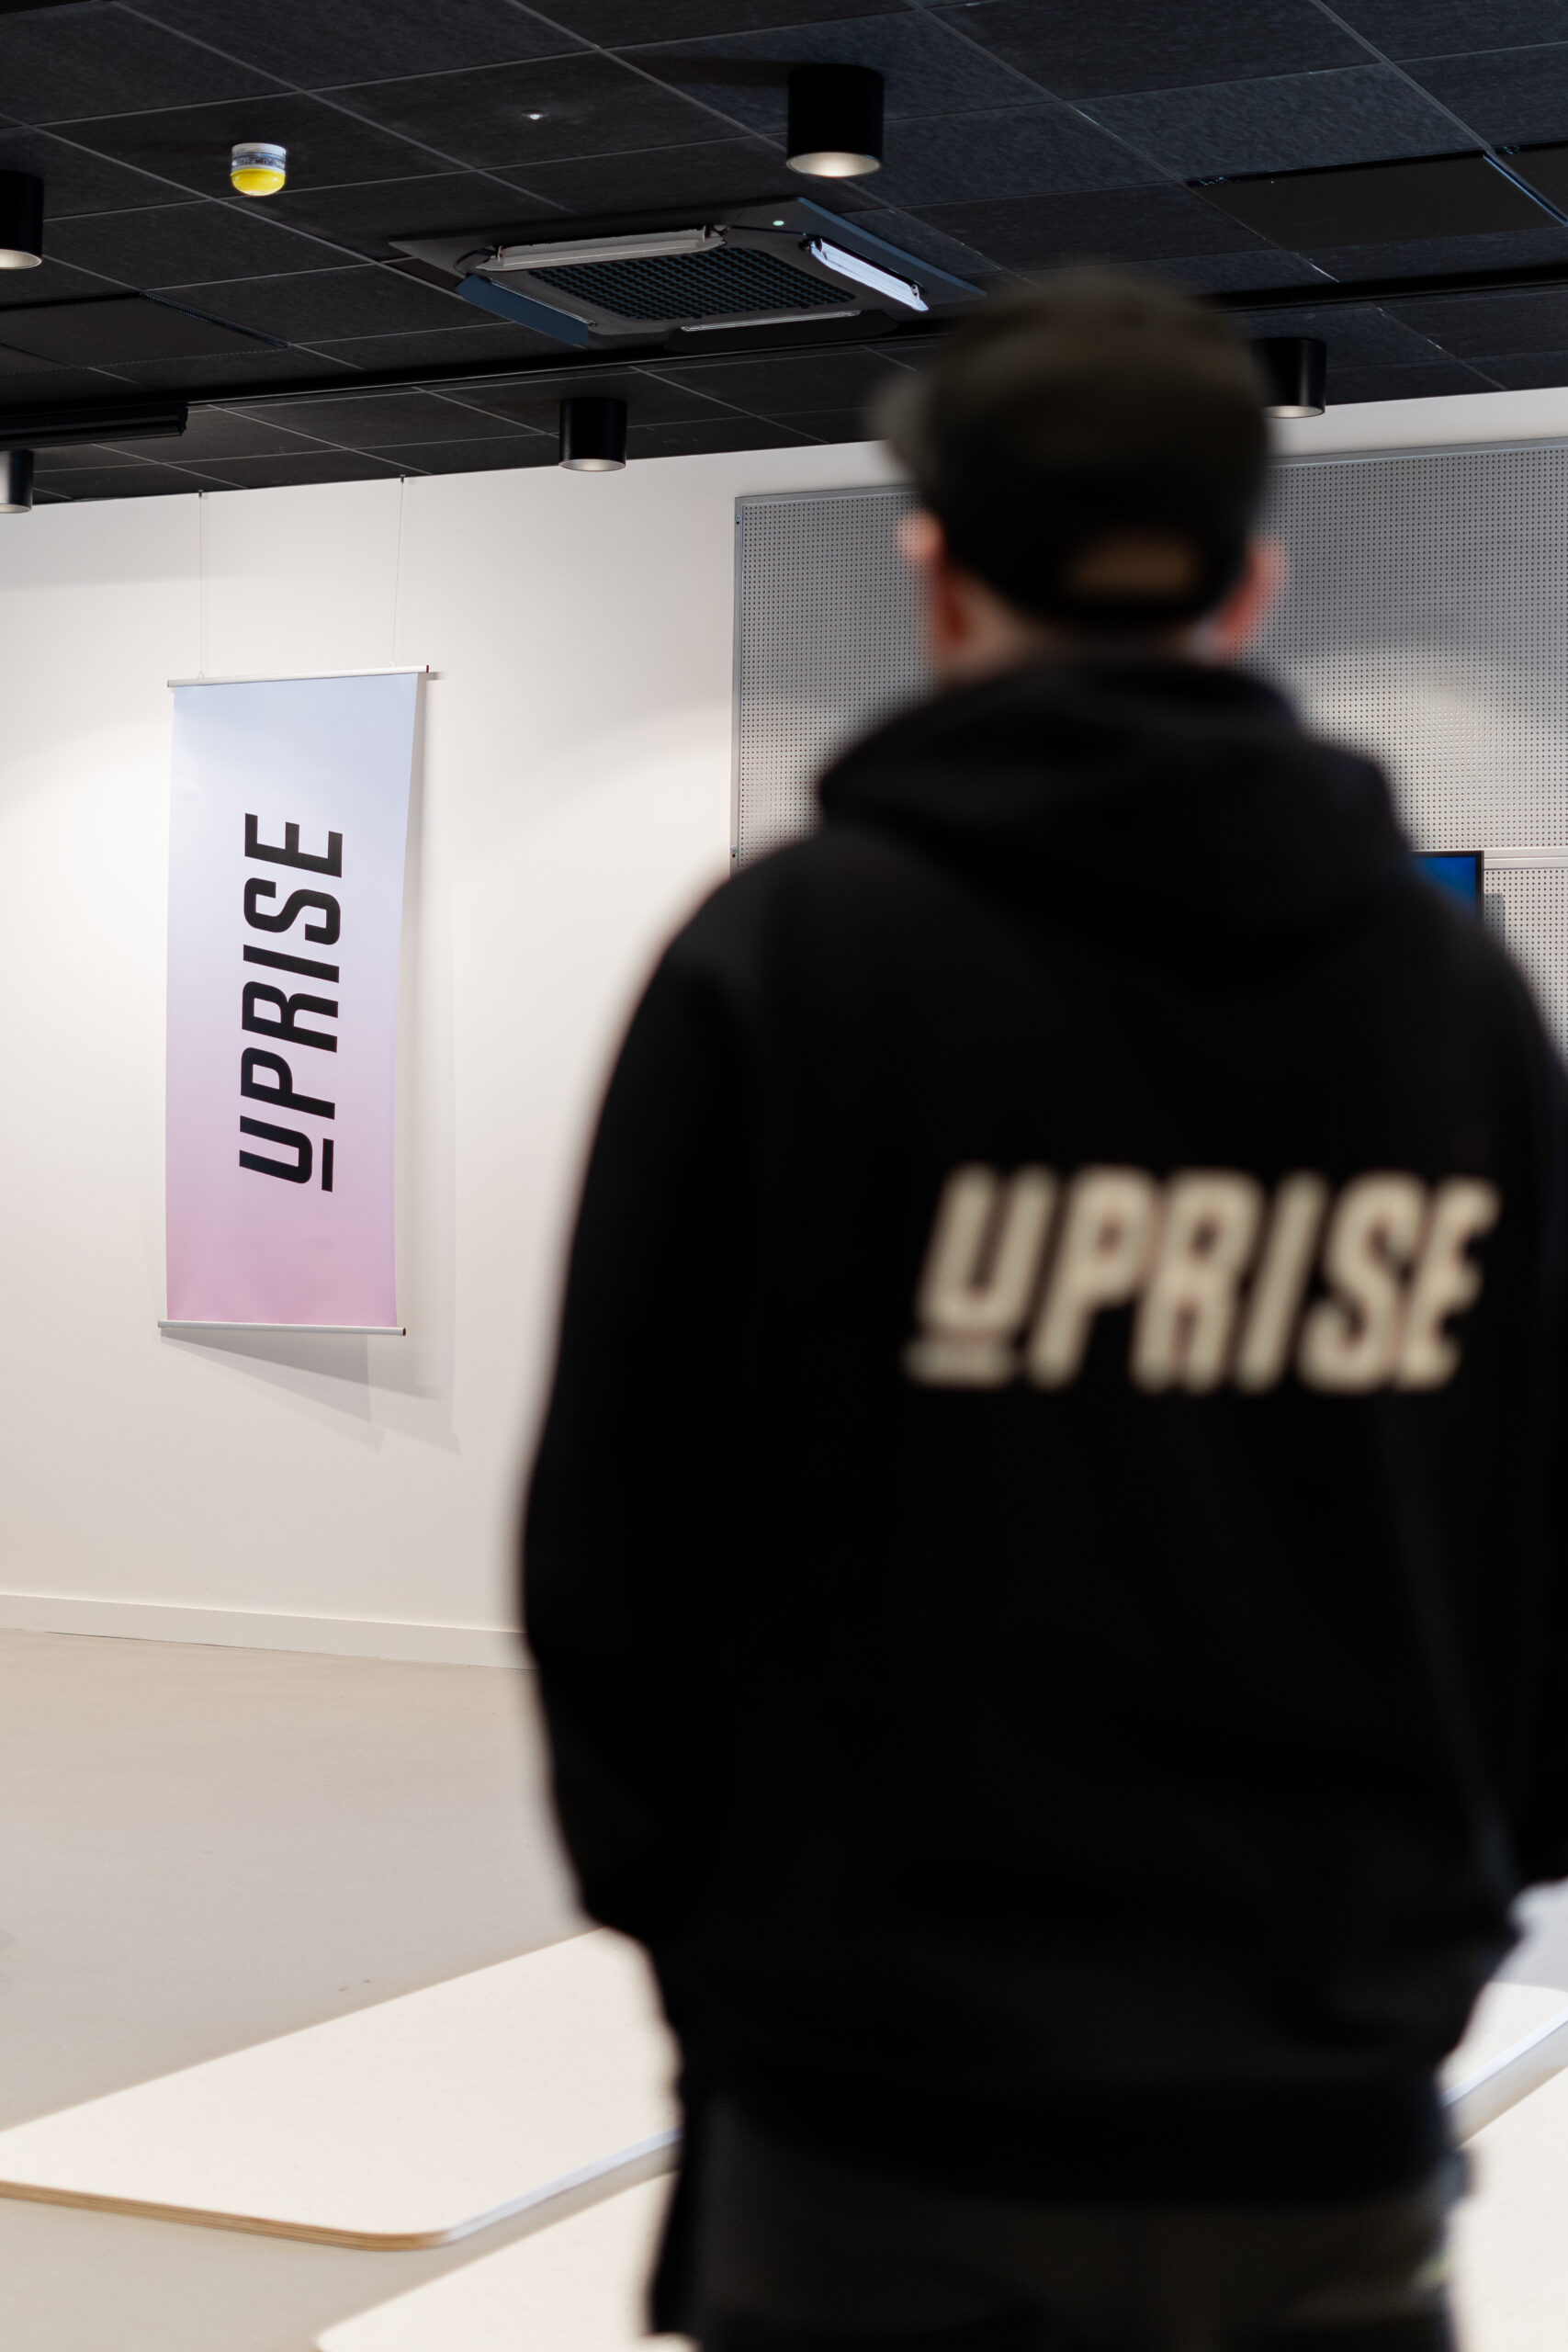 Introducing…Uprise Electric!